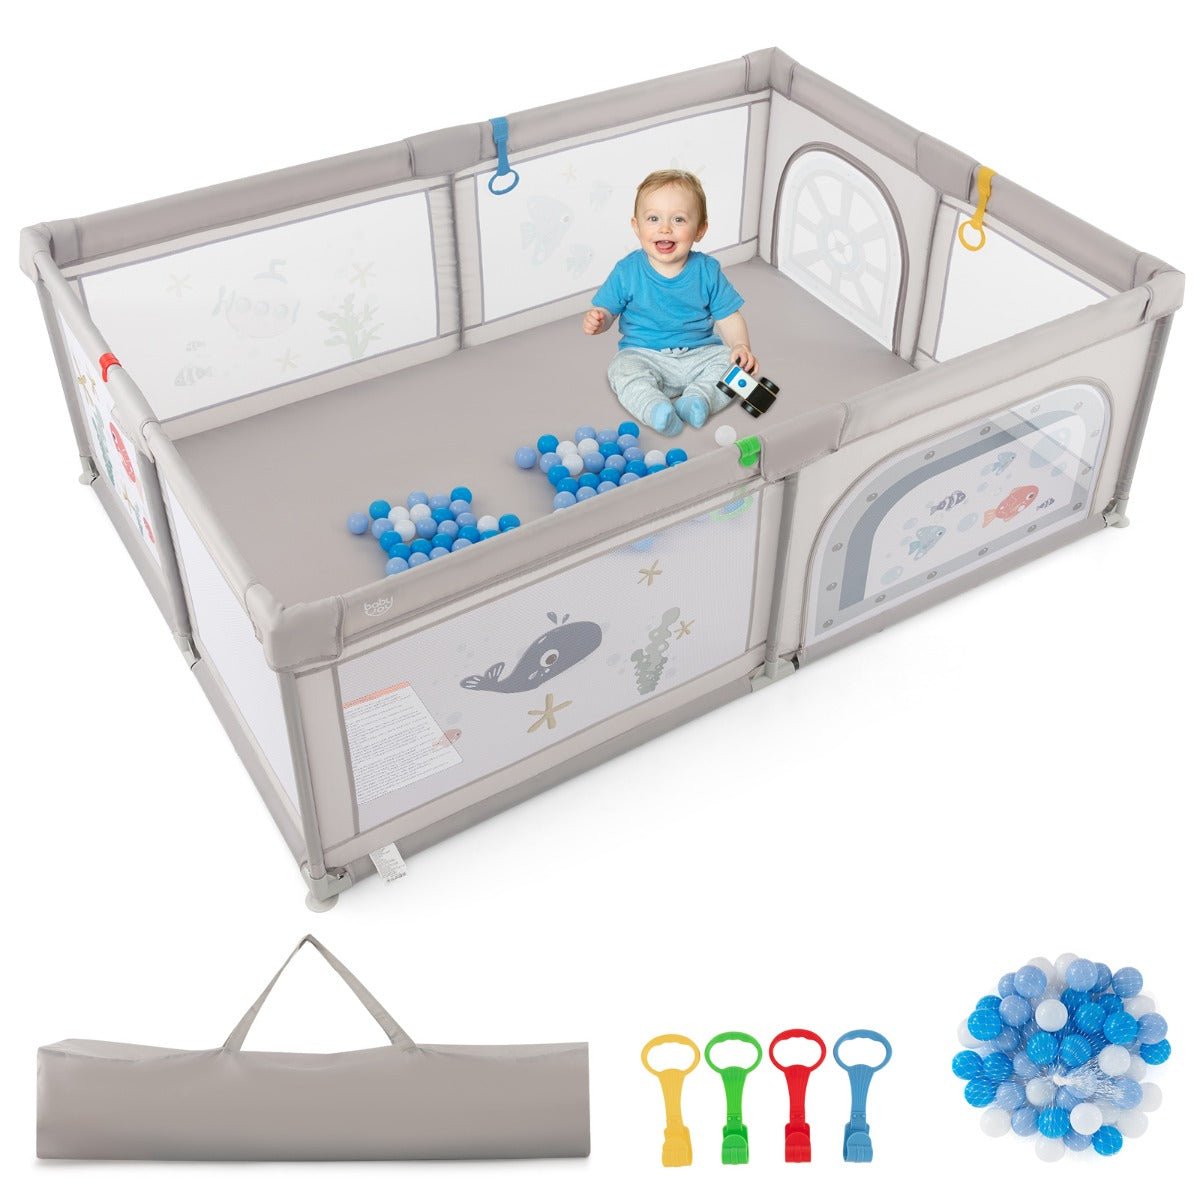 Whale-Themed Playpen Adventure